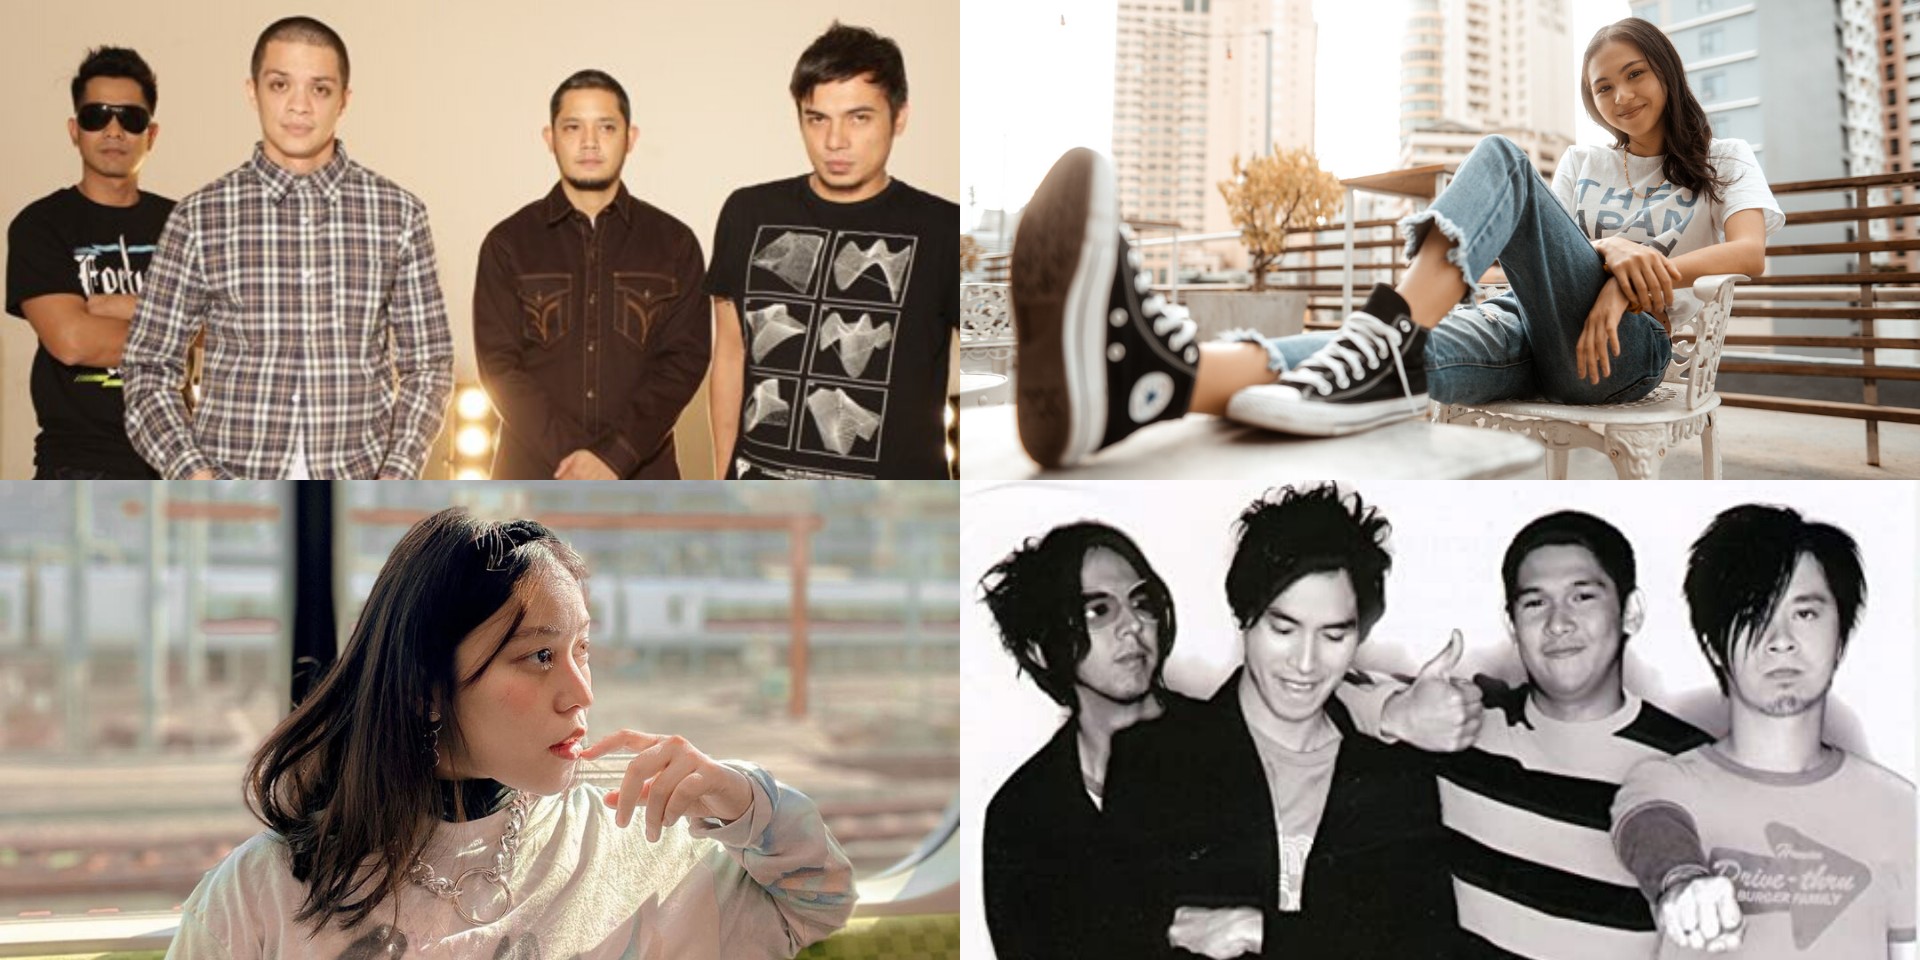 Feeling down? Here's a list of songs from Filipino artists (and causes you can support) to lift your spirits this quarantine season